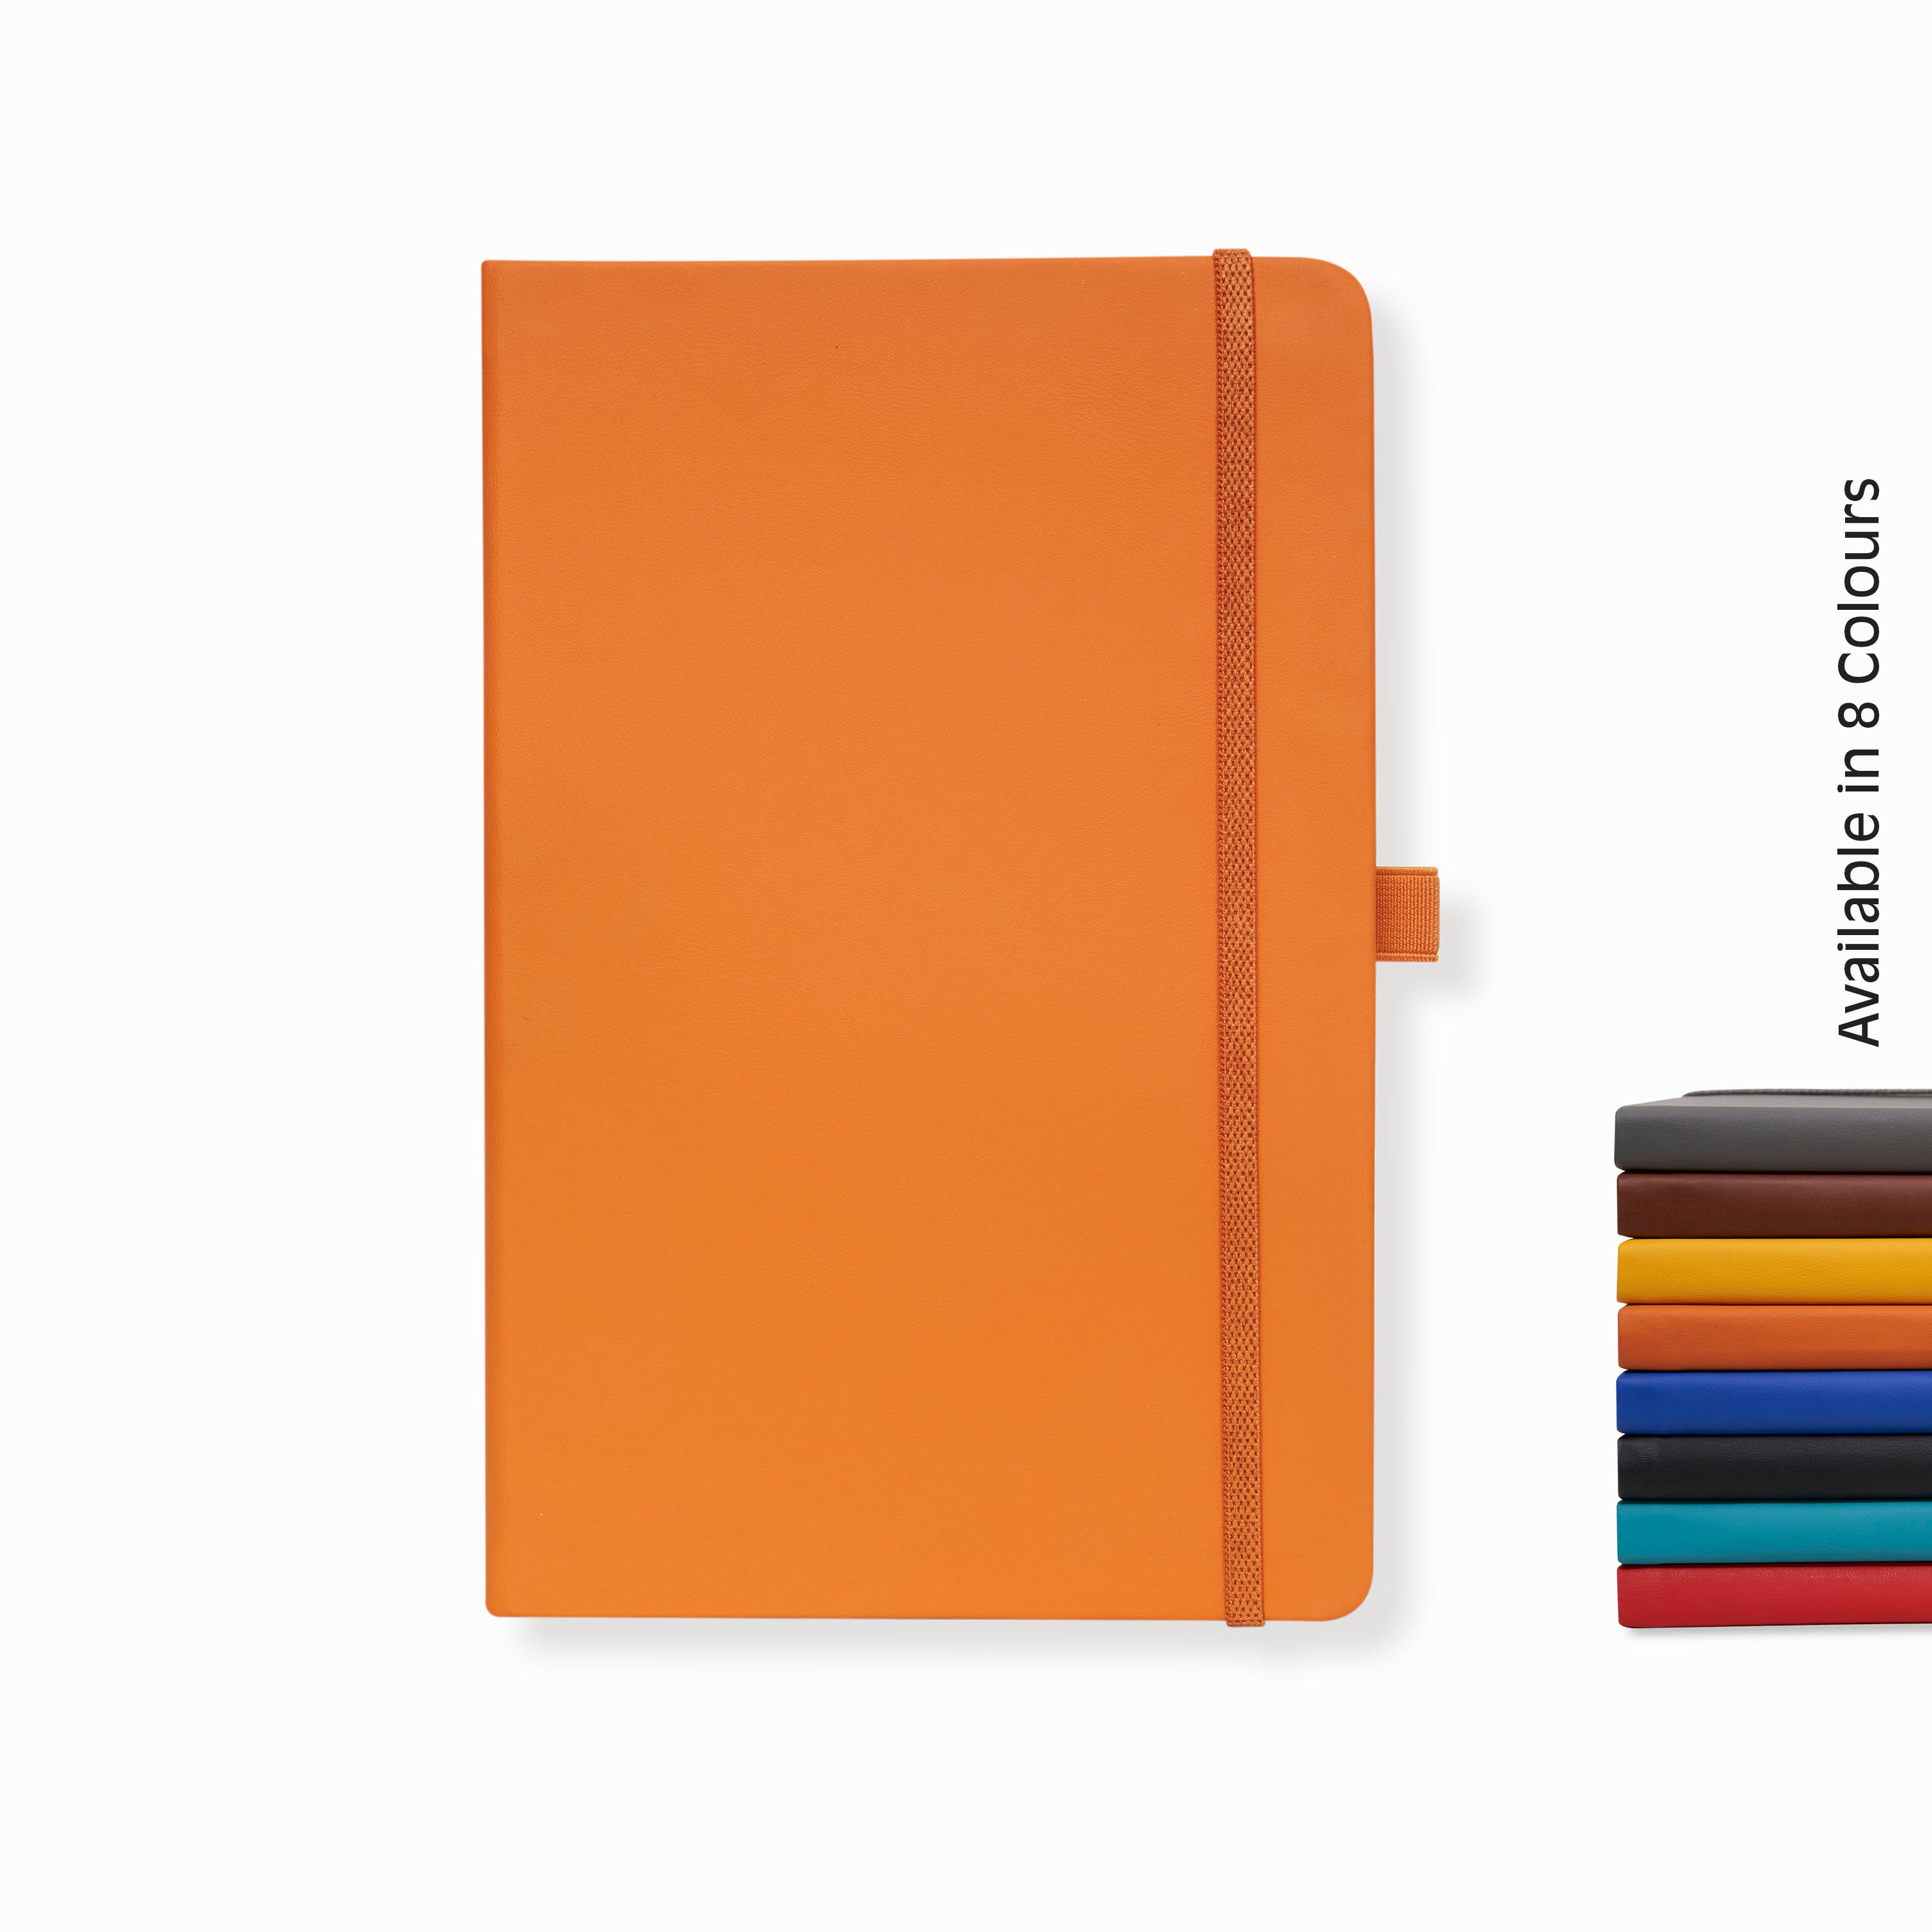 Pro Series Executive A5 PU Leather Hardbound Unruled Diary with Pen Loop - ORANGE